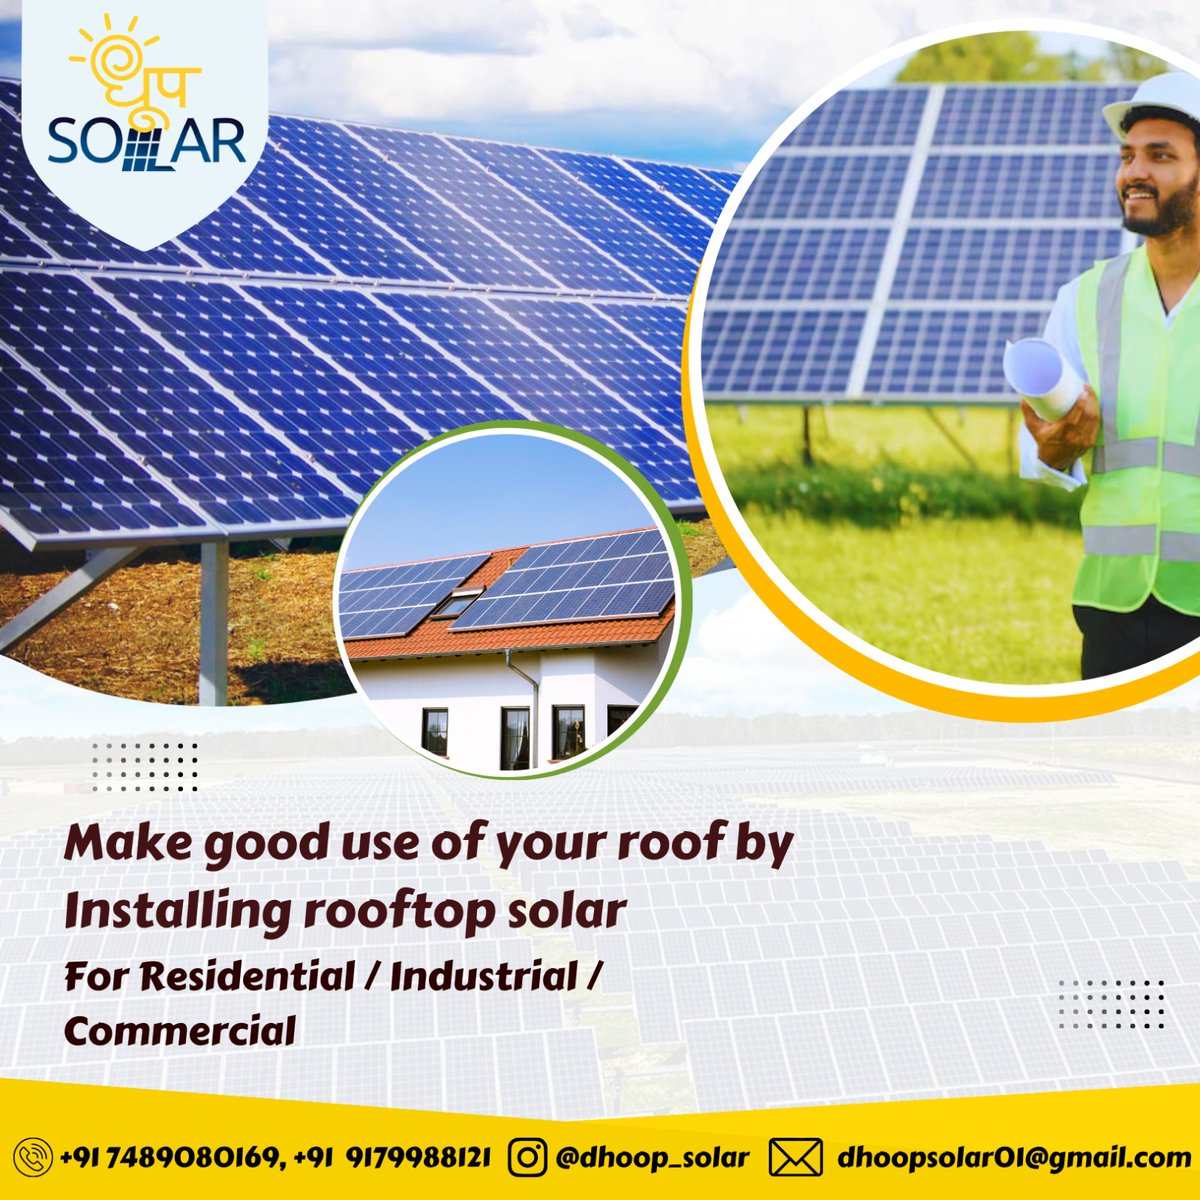 Let the Sun Shine Bright with Dhoop Solar Panels! ☀️ Harnessing Clean Energy for a Brighter Tomorrow. 
.
.
#DhoopSolar  #RhashtagleanEnergyenewableFuture #SustainableLiving #GoGreen #HarnessTheSun #SolarPanel #EnergyEfficiency #GreenTechnology